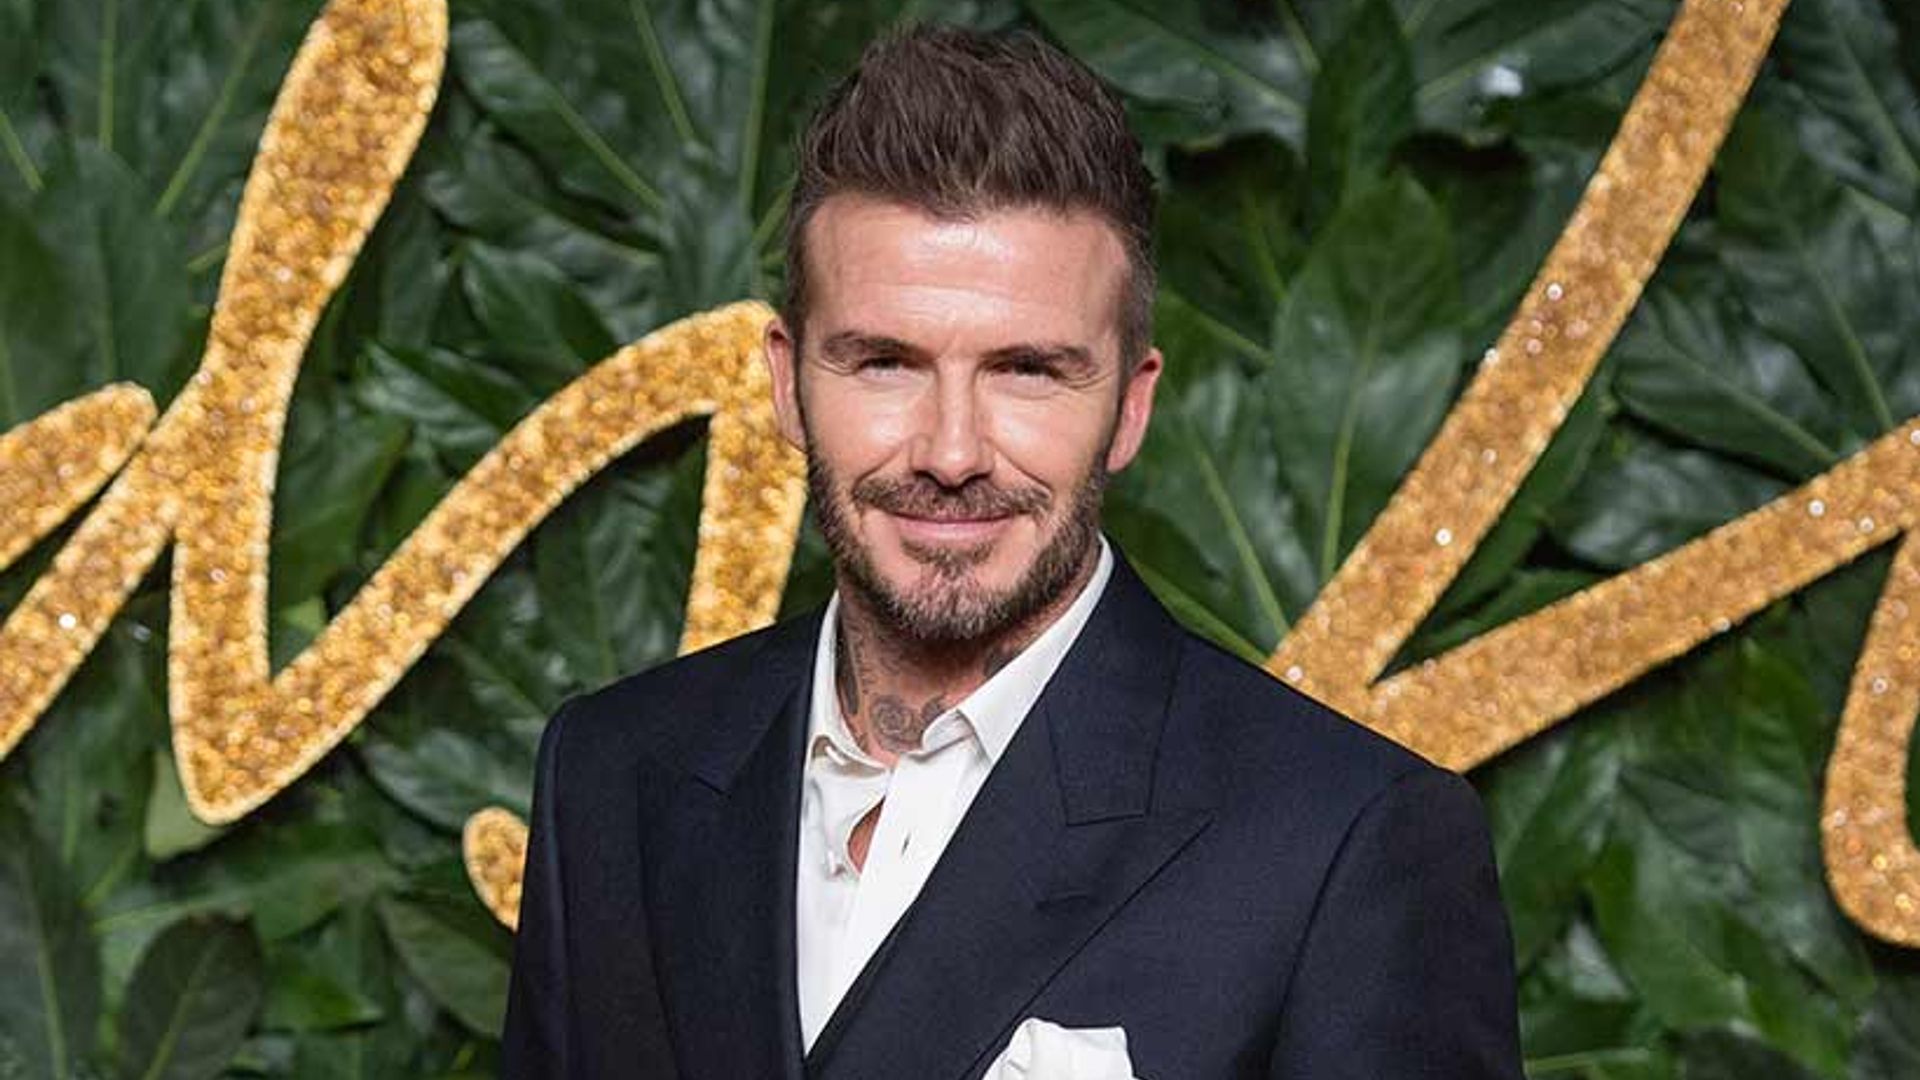 David Beckham has made an unexpected £14,000 addition to the family home – what will Victoria say?